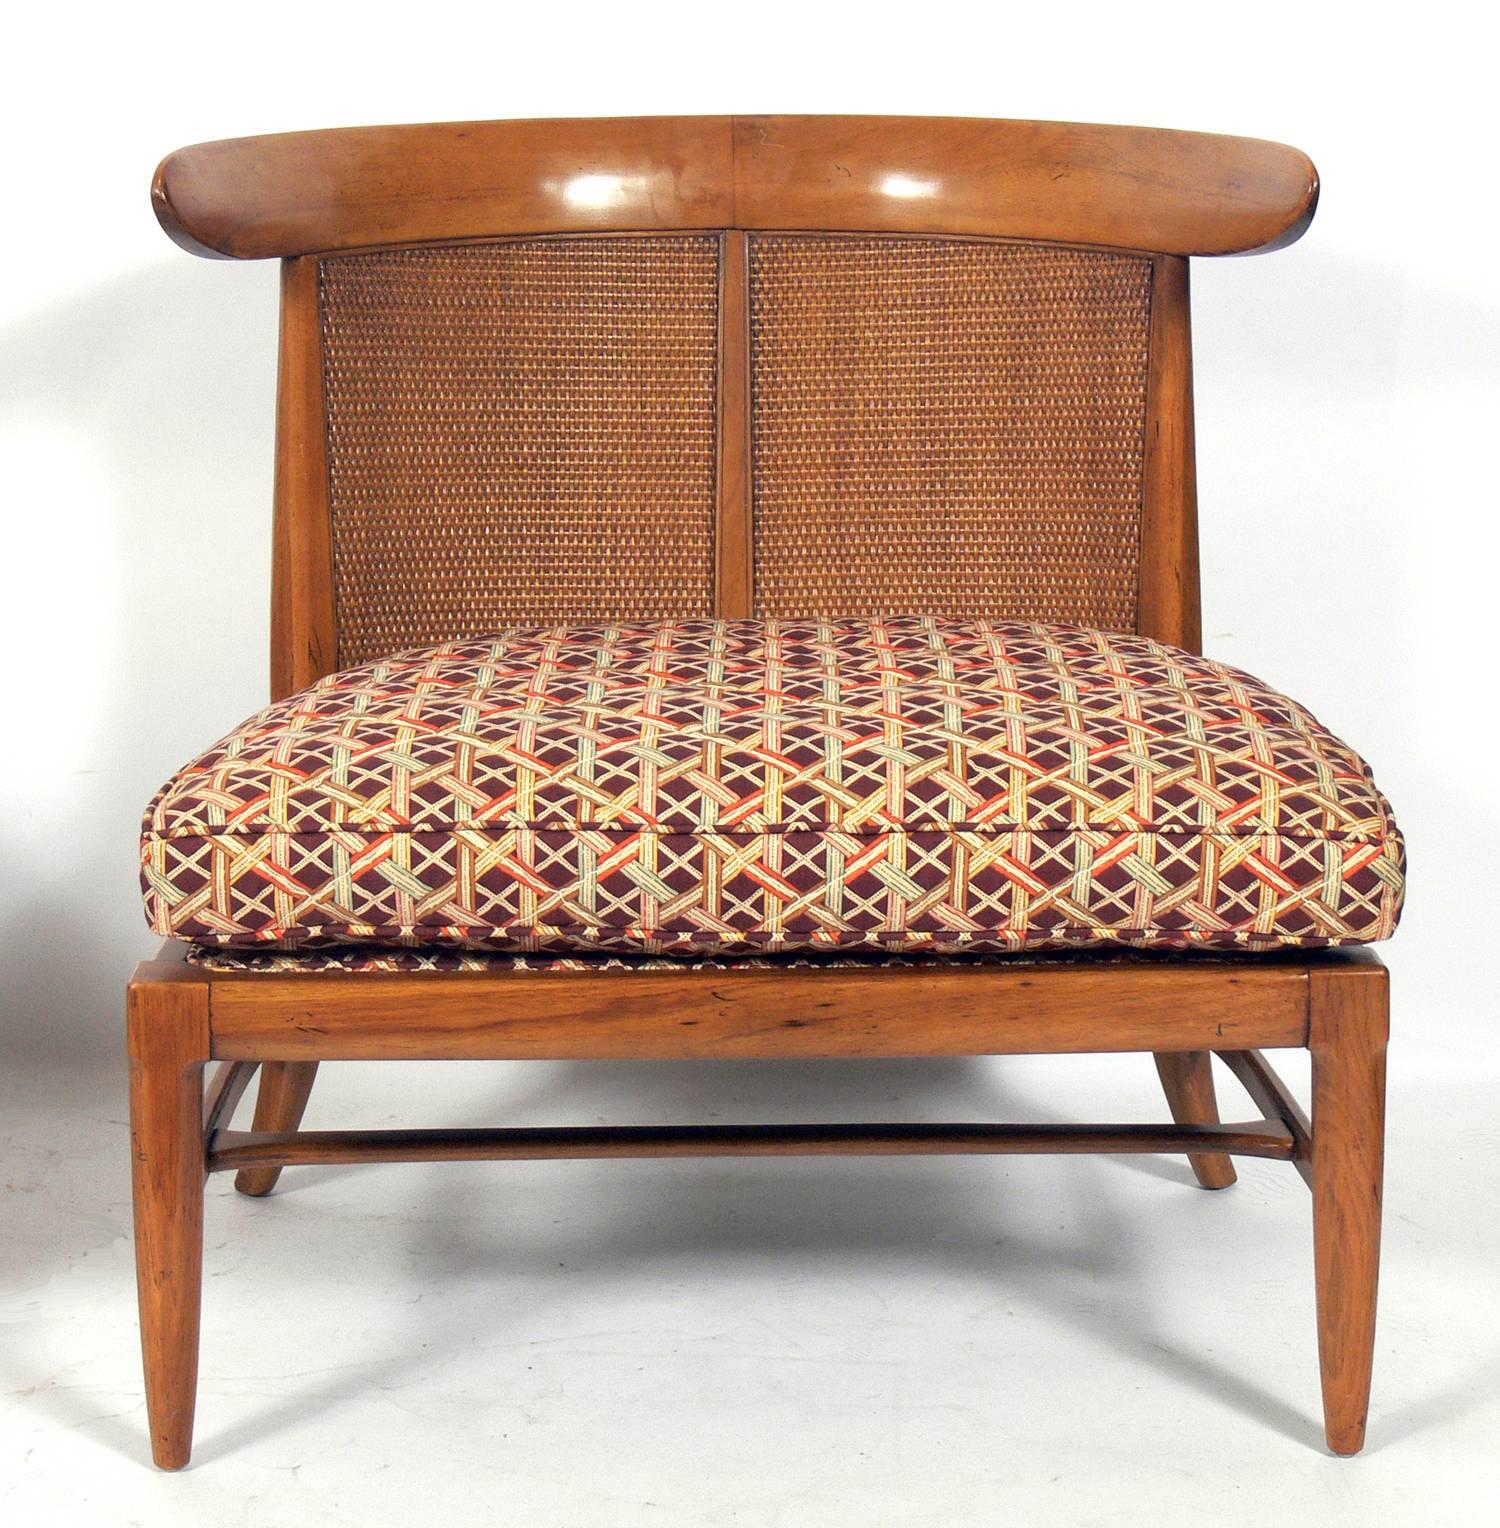 Pair of Curvaceous caned back slipper chairs, designed by John Lubberts and Lambert Mulder for Tomlinson, American, circa 1950s. Designed for Tomlinson's 